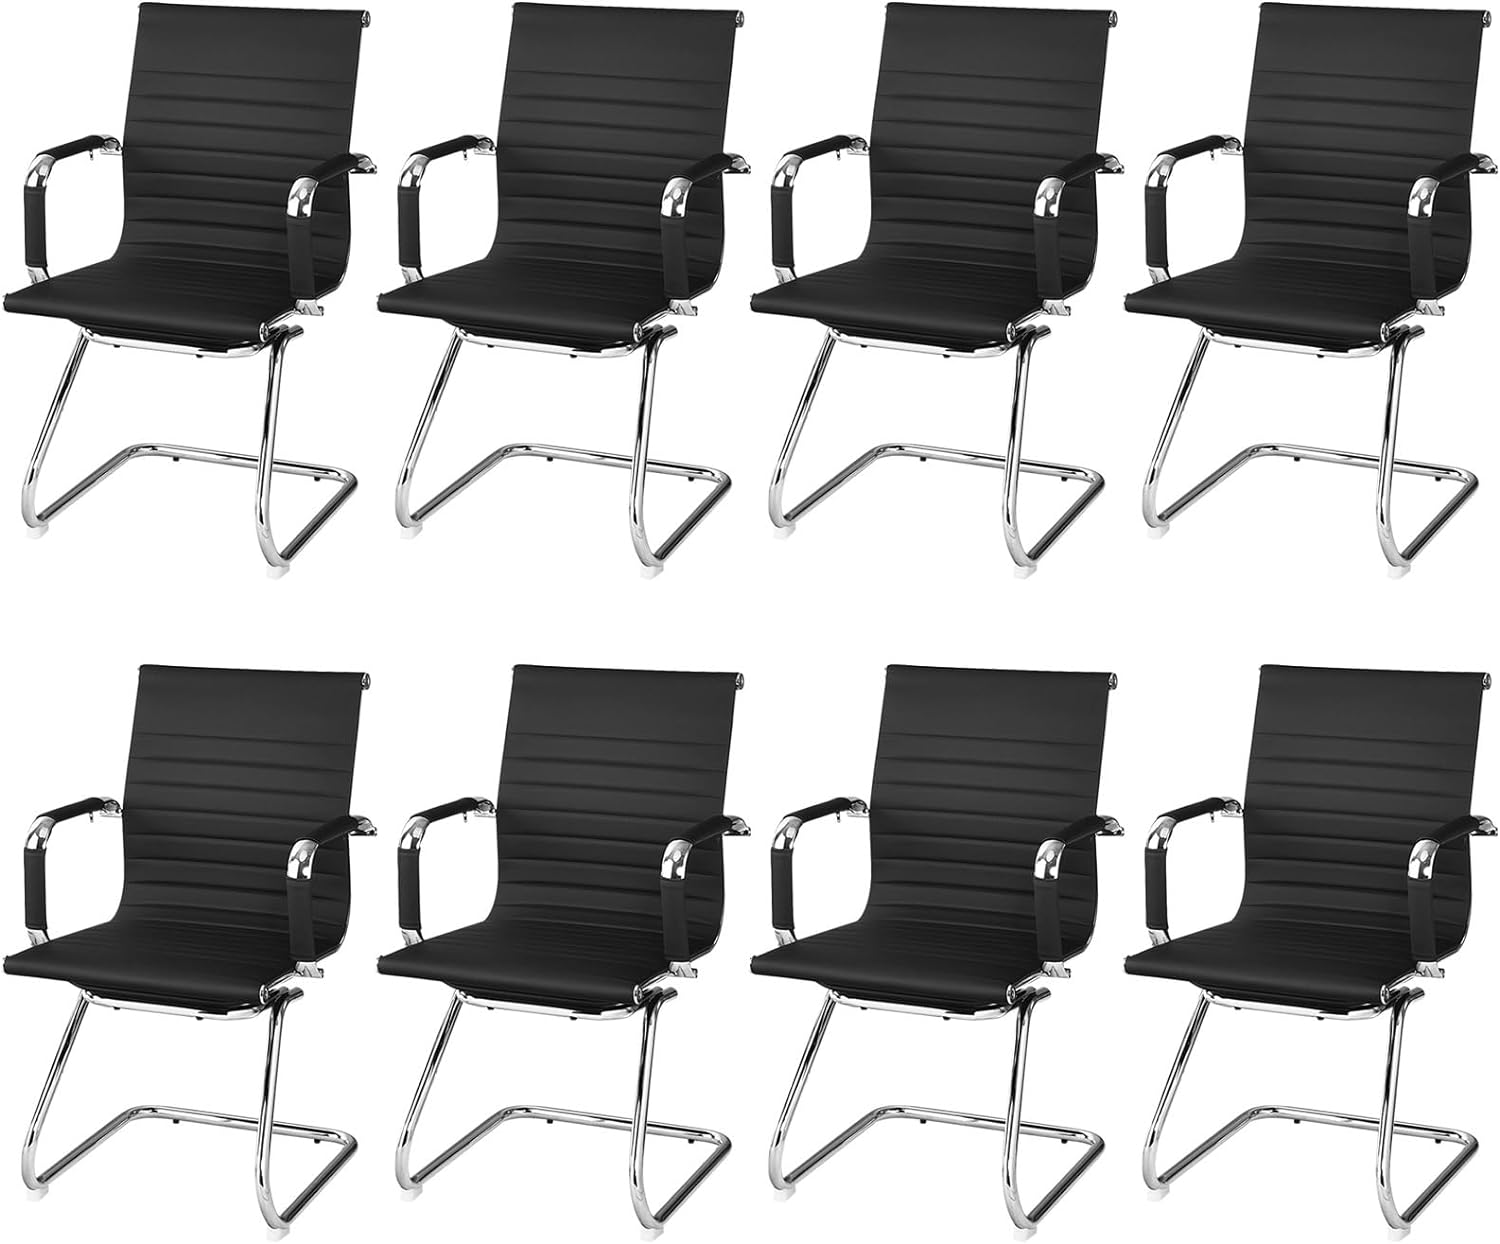 Giantex Conference Chair Set of 4 Heavy Duty PU Leather W/Protective Arm Sleeves